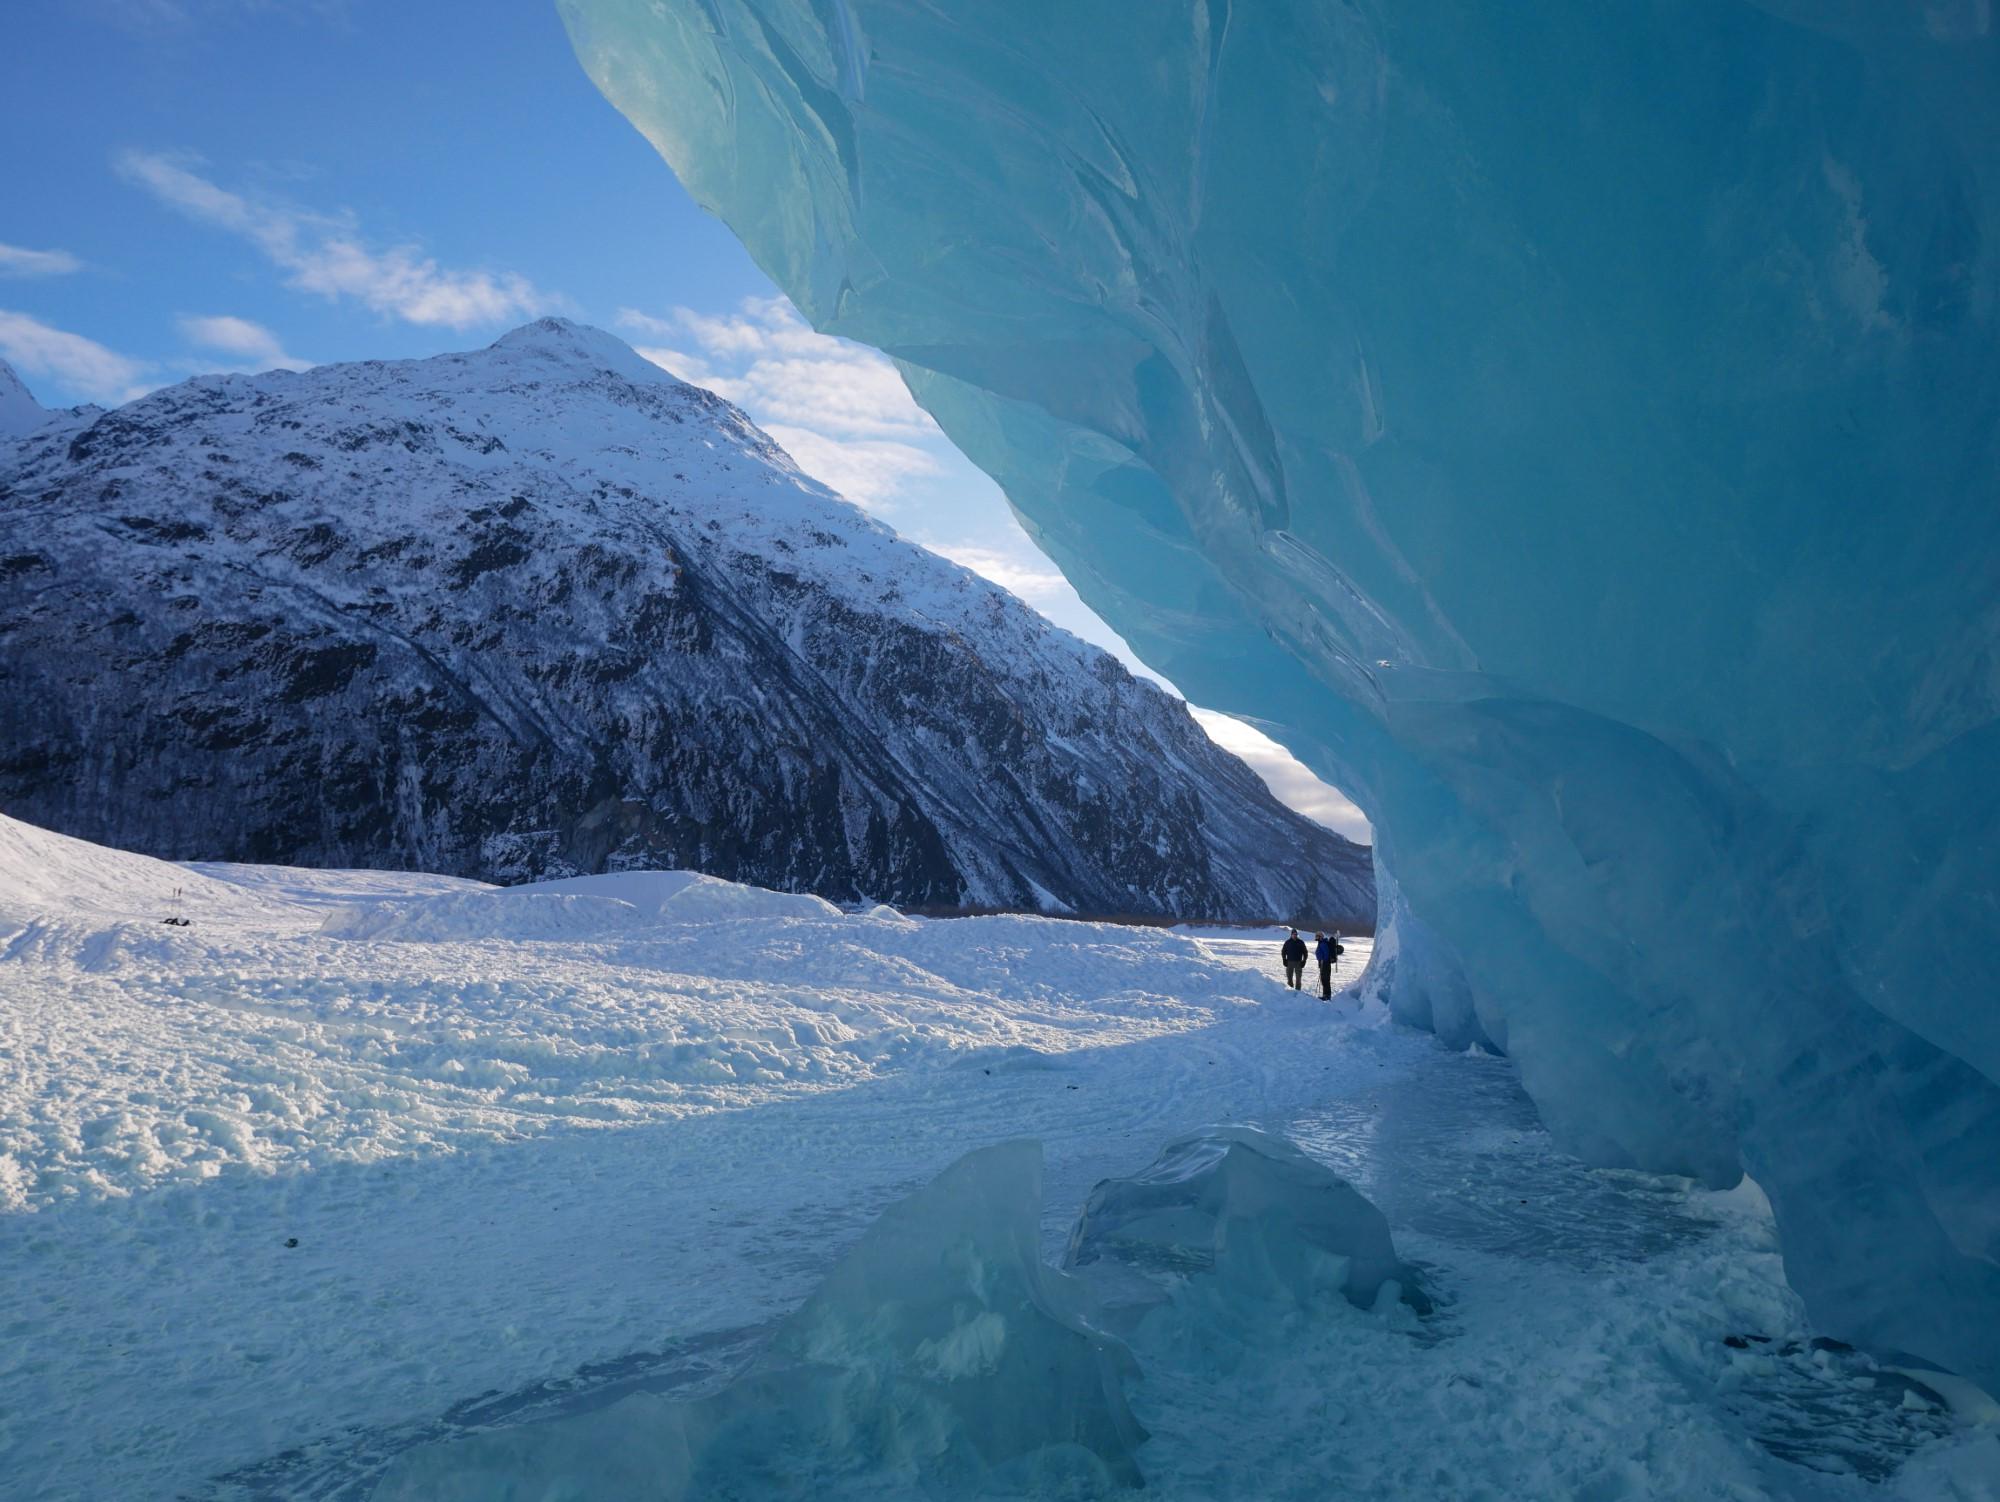 two people standing in between a snowy mountain and a large scale of ice